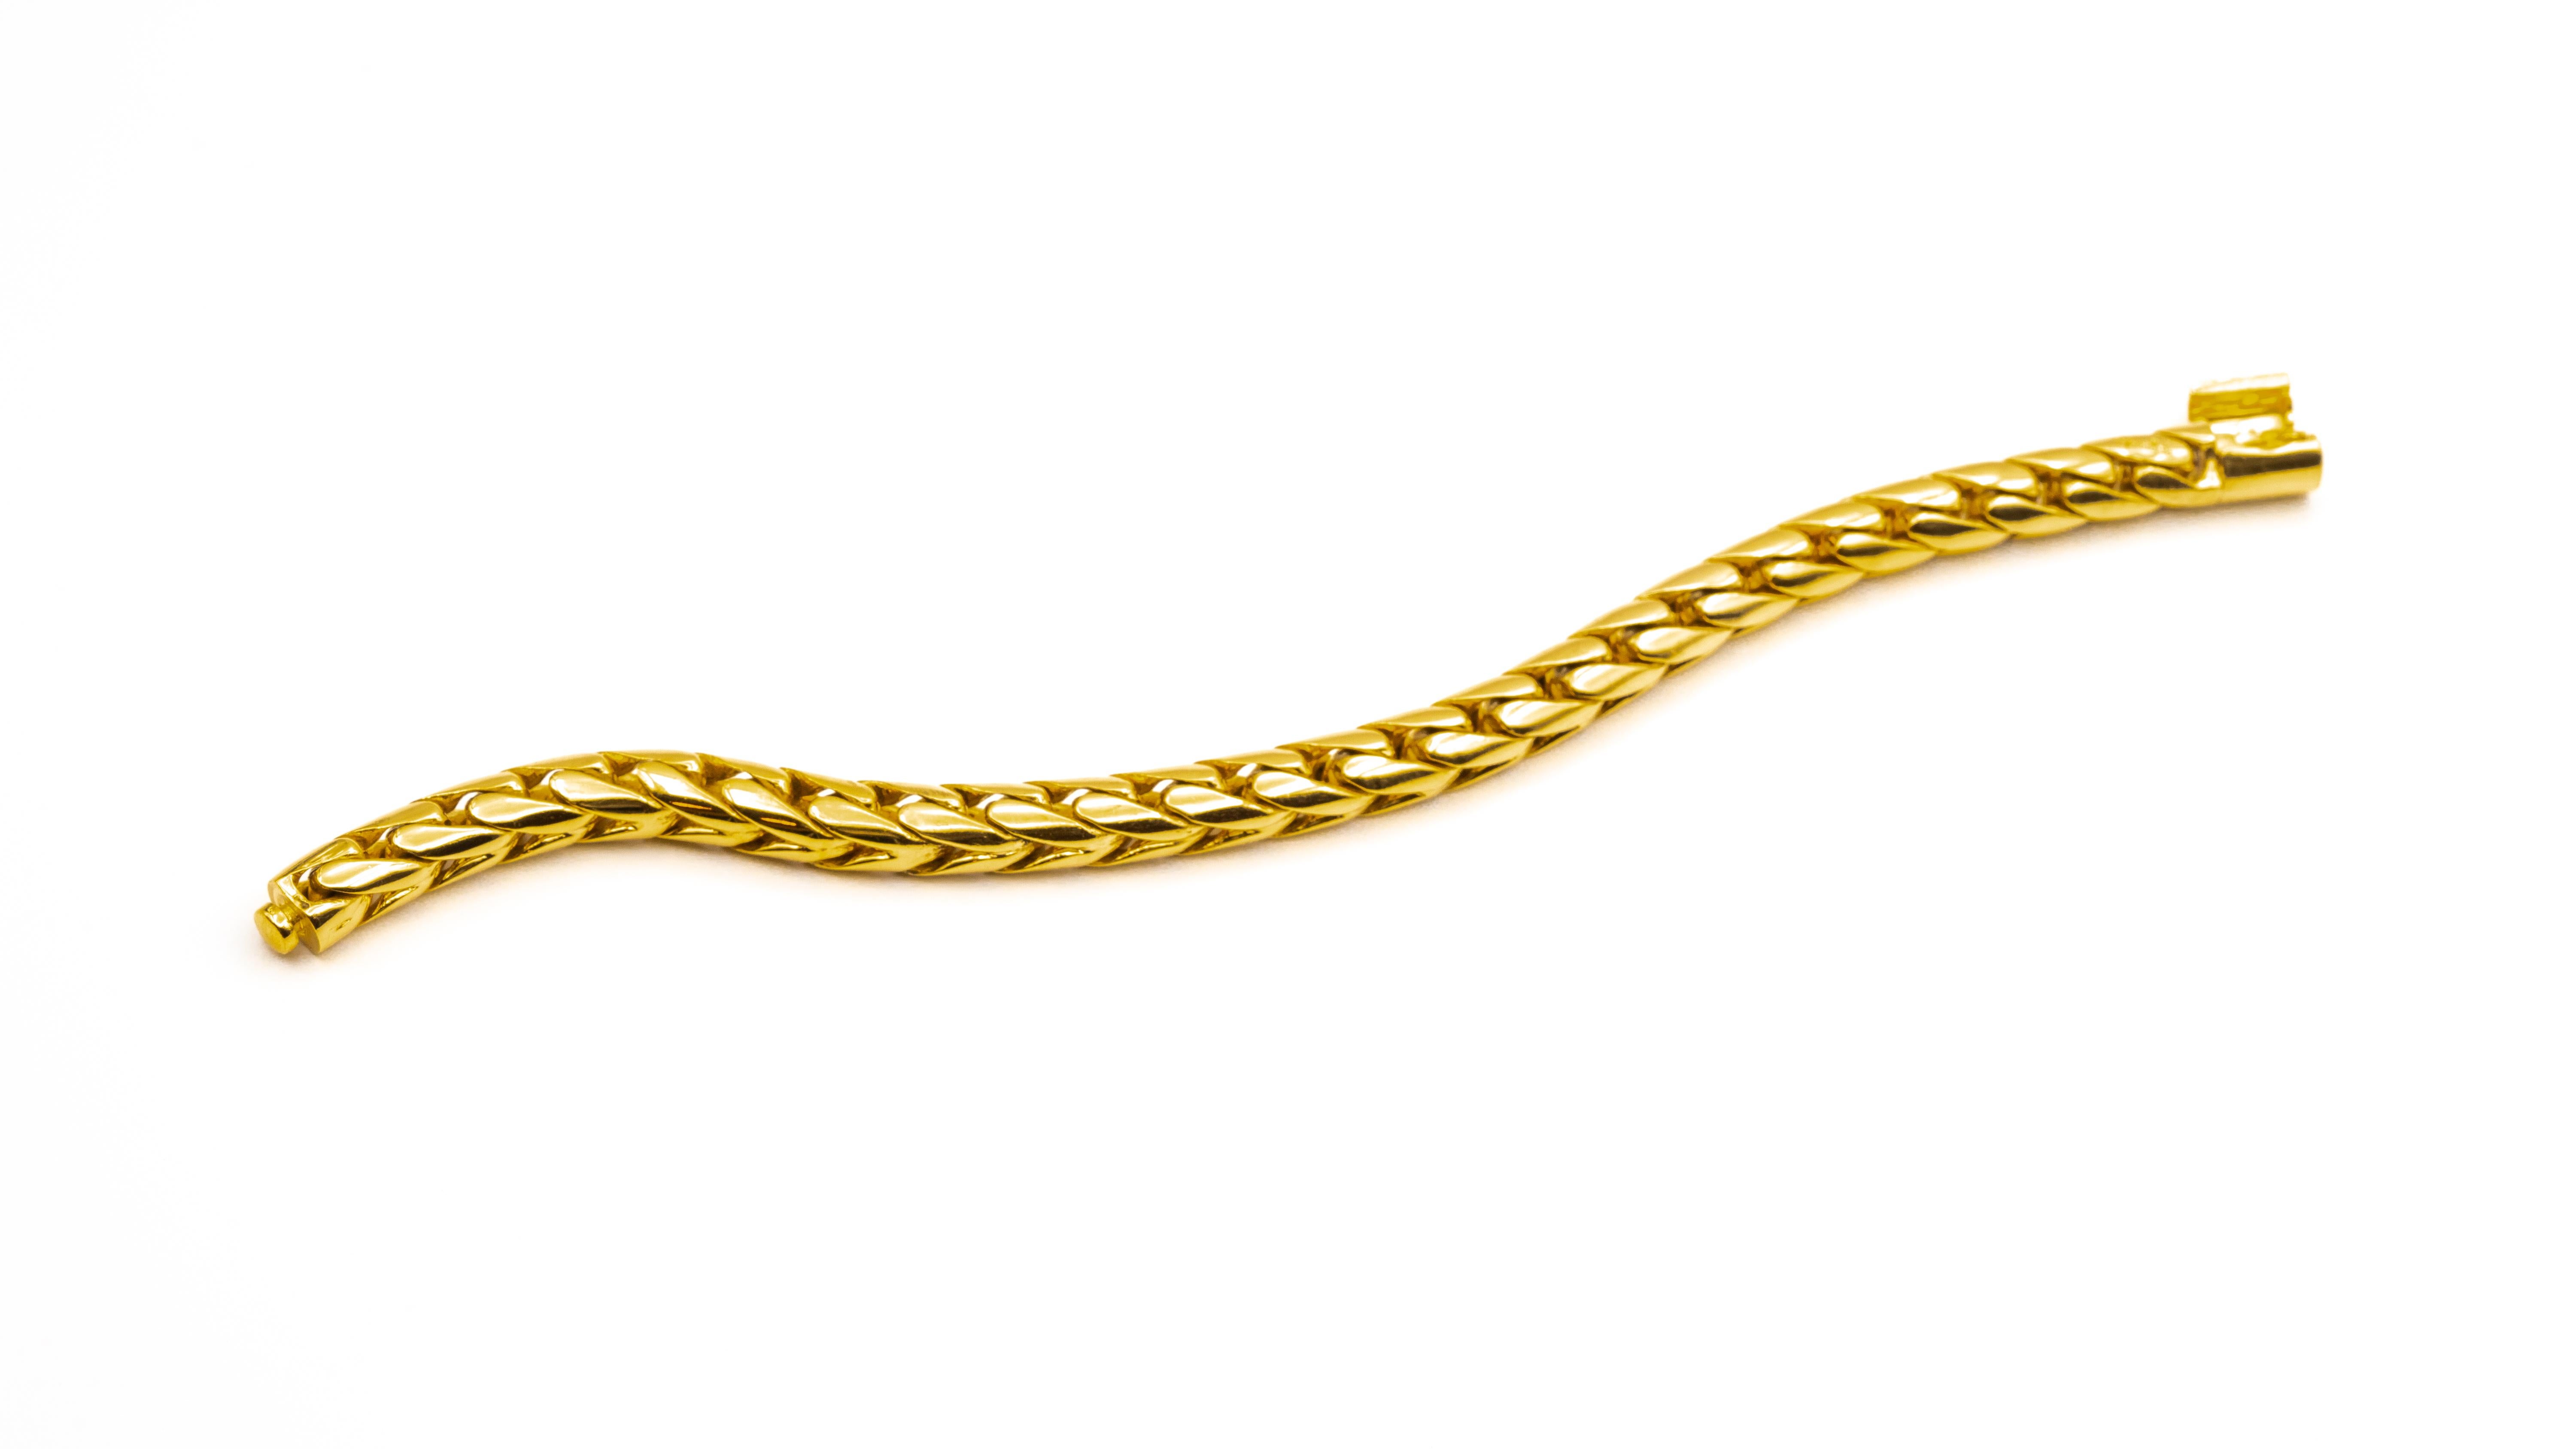 Pomellato 18K Yellow Gold Tubular Herringbone Bracelet  
This fabulous vintage Pomellato link bracelet features thick tubular links in a herringbone pattern, weighs an impressive 98 grams , and measures 8 inches long, 
Brand: Pomellato 
Weight: 98